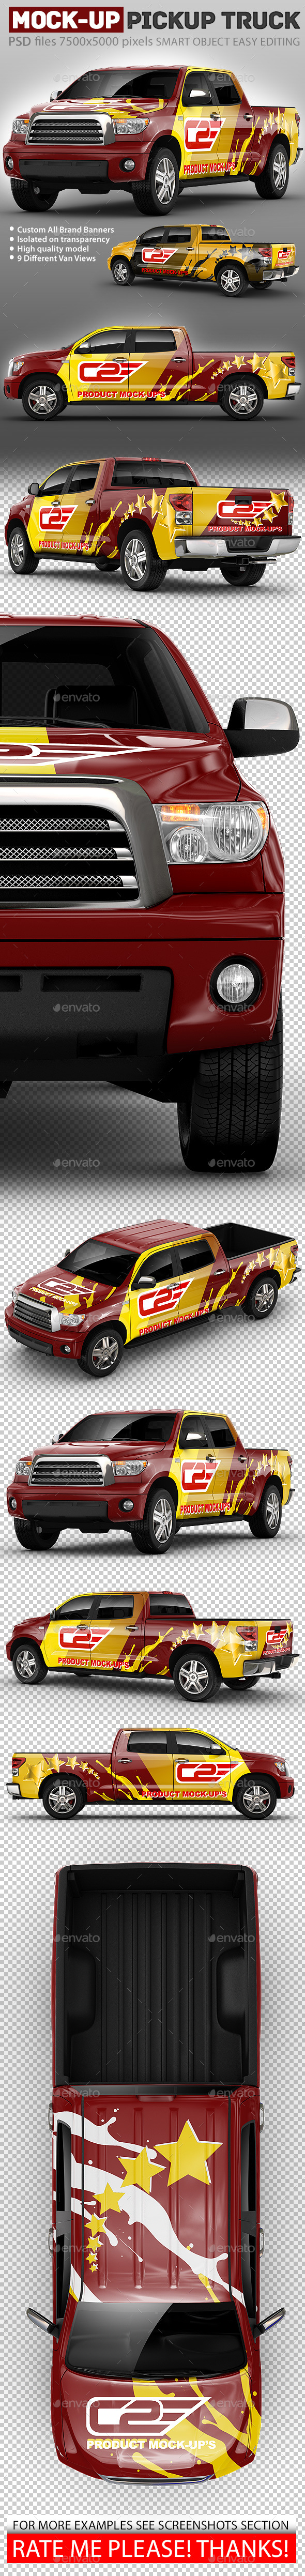 Pickup Mock-Up based on truck Toyota Tundra Crewmax